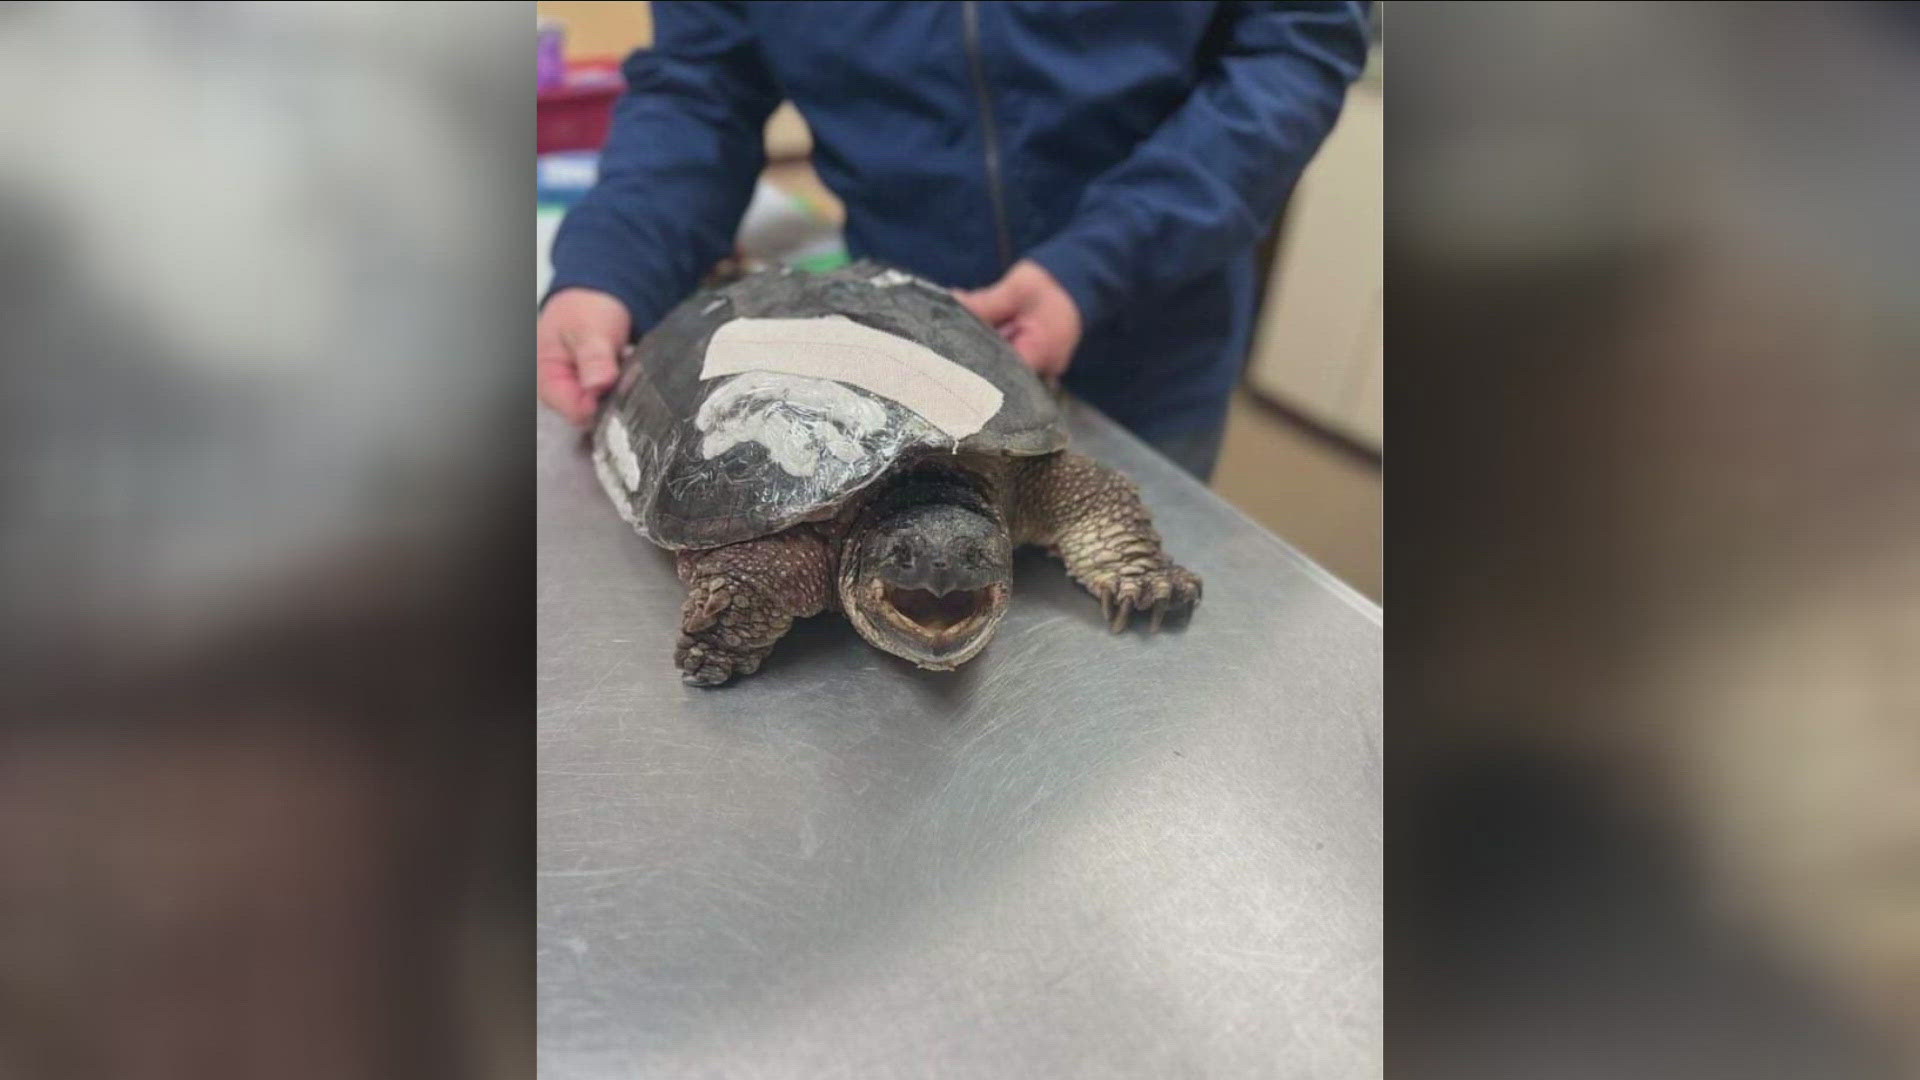 The two snapping turtles, Bubbles and Otis, are now recovering at WNY Raptor.